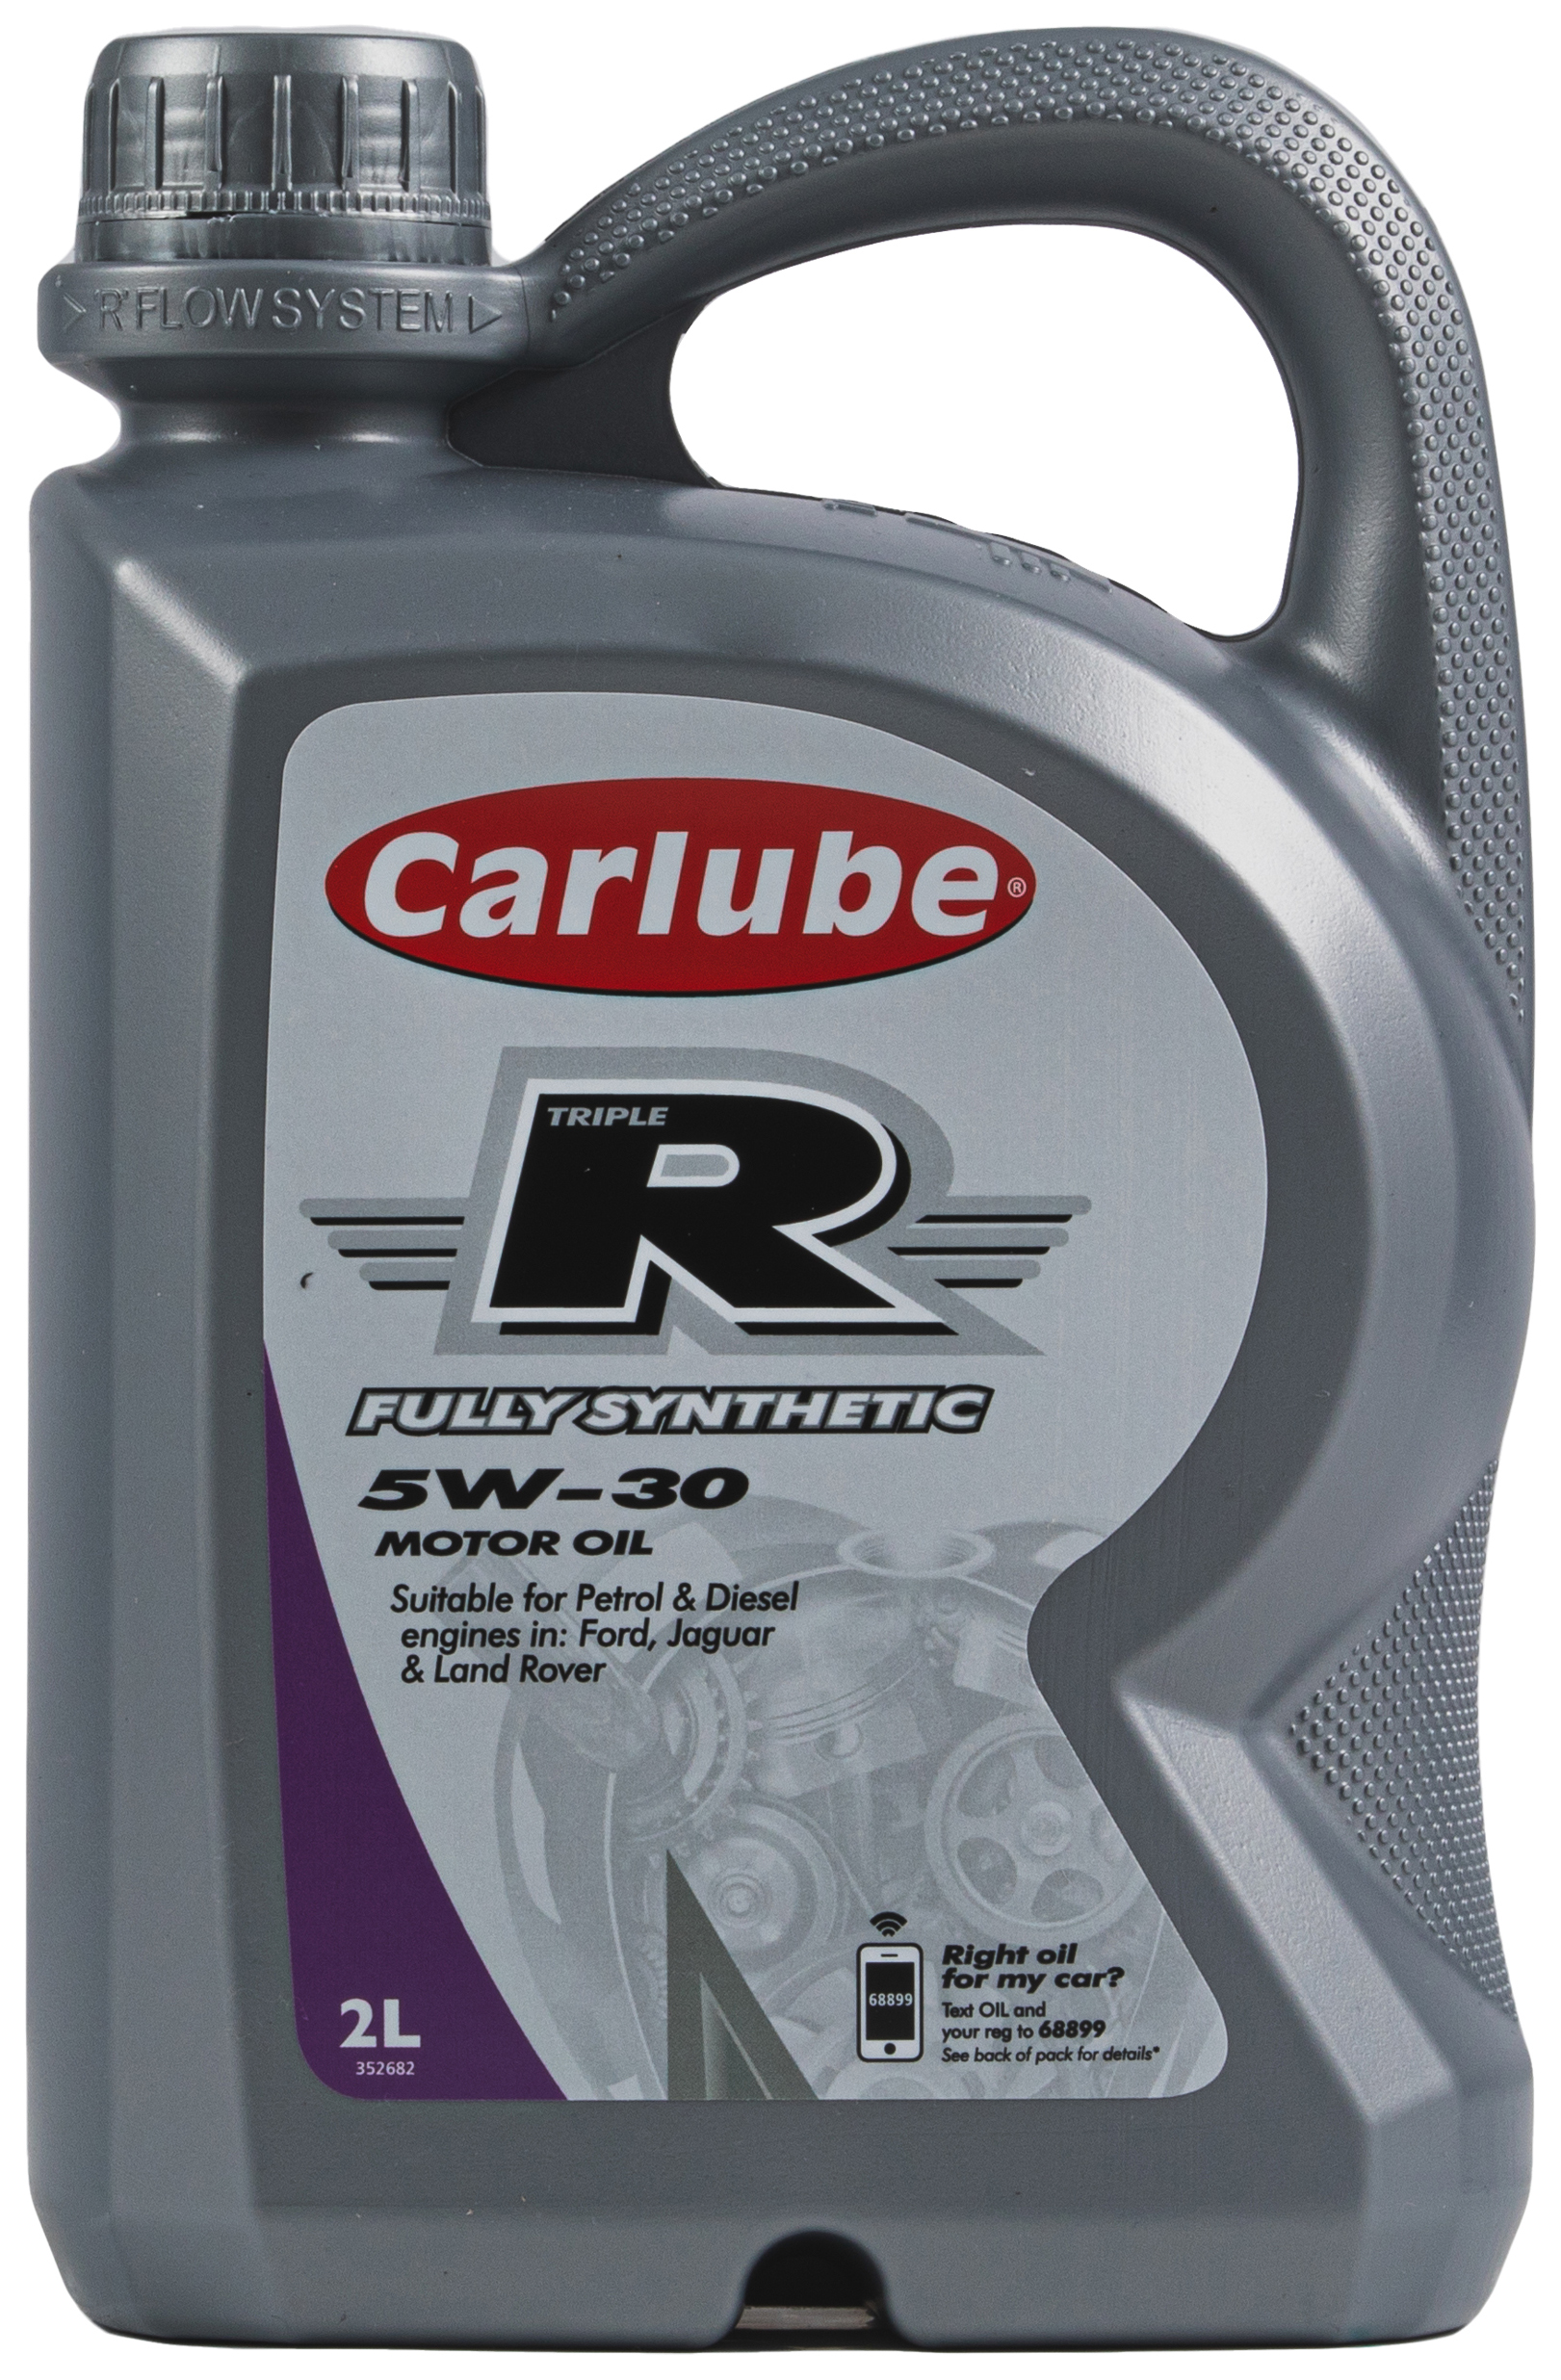 Carlube Triple R 5W-30 Ford Fully Synthetic Engine Oil - 2L